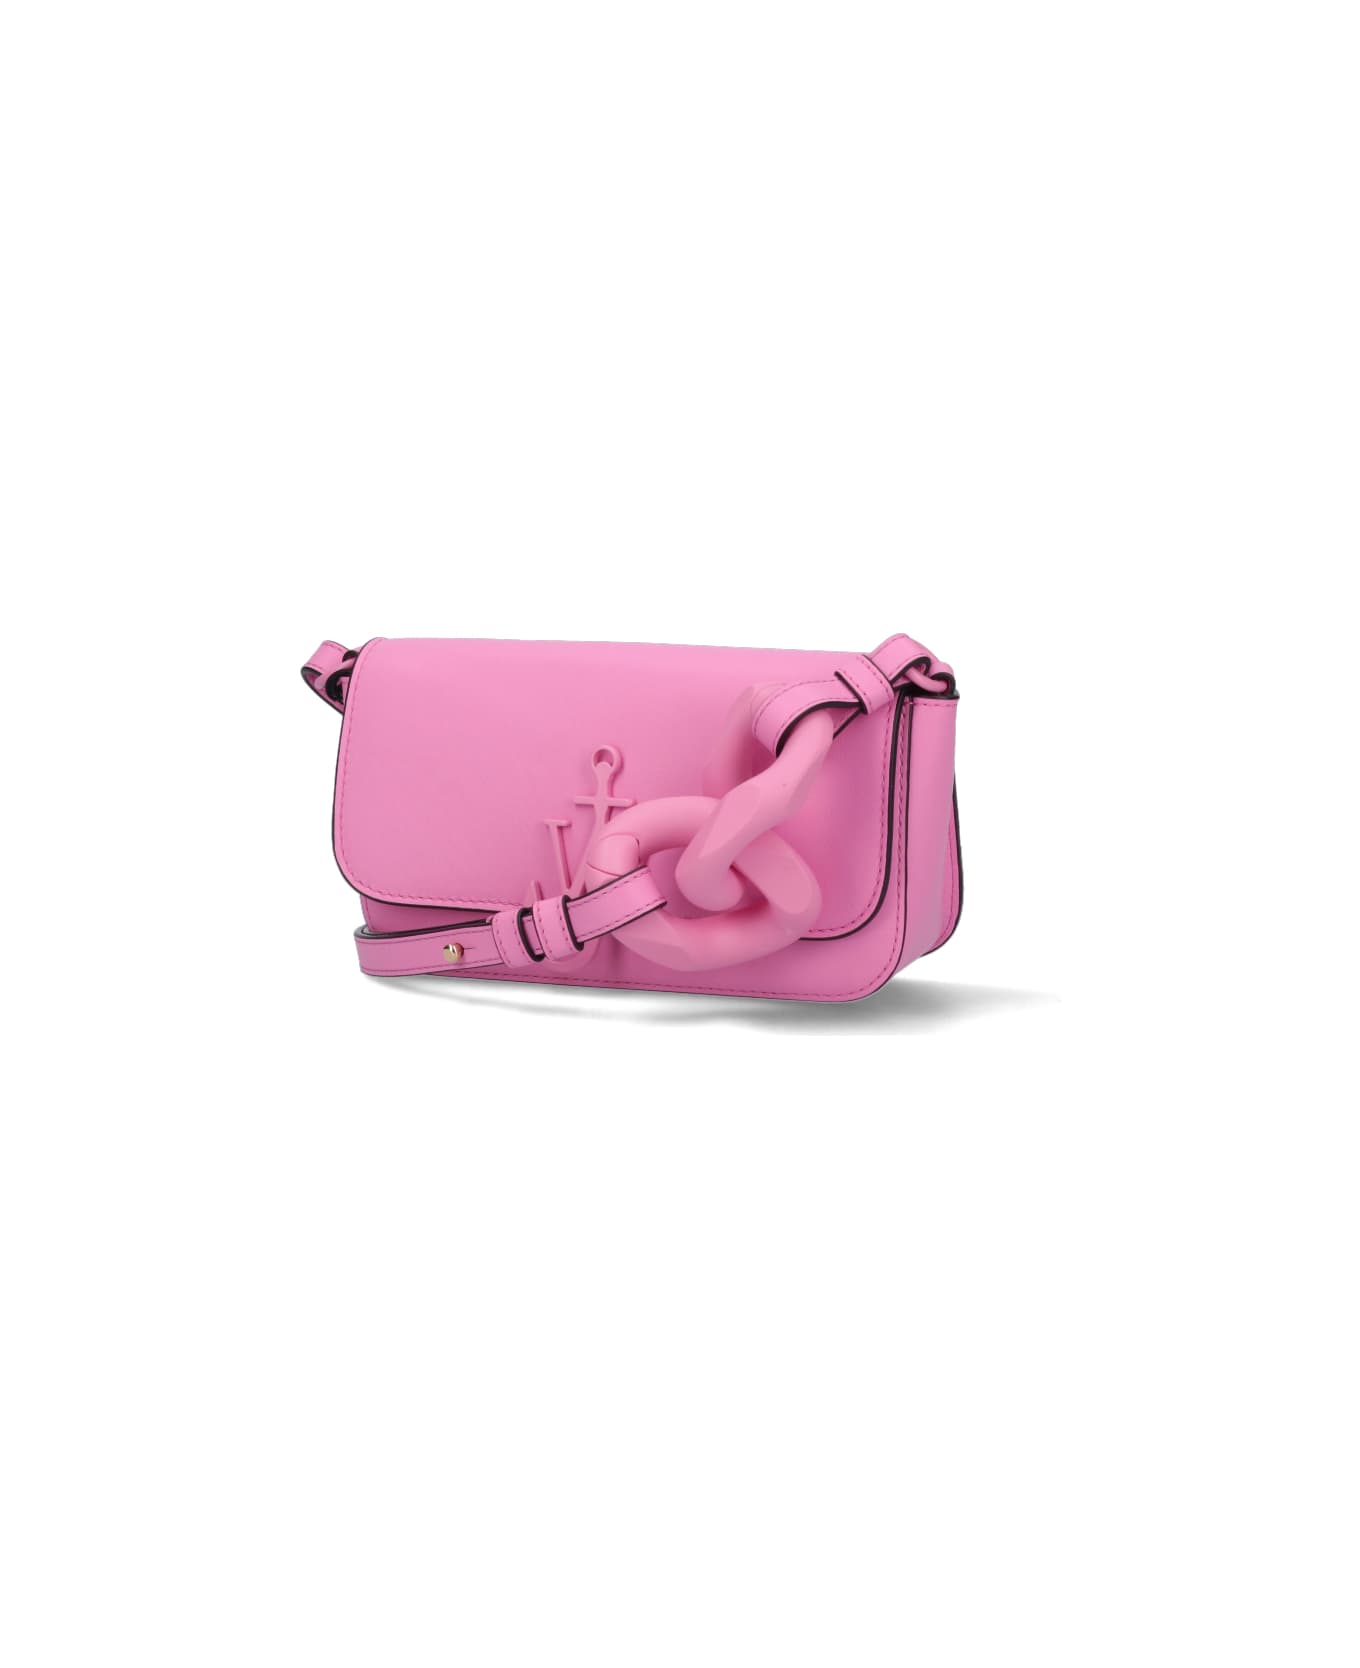 J.W. Anderson 'chain Baguette Anchor' Bag - Pink ショルダーバッグ